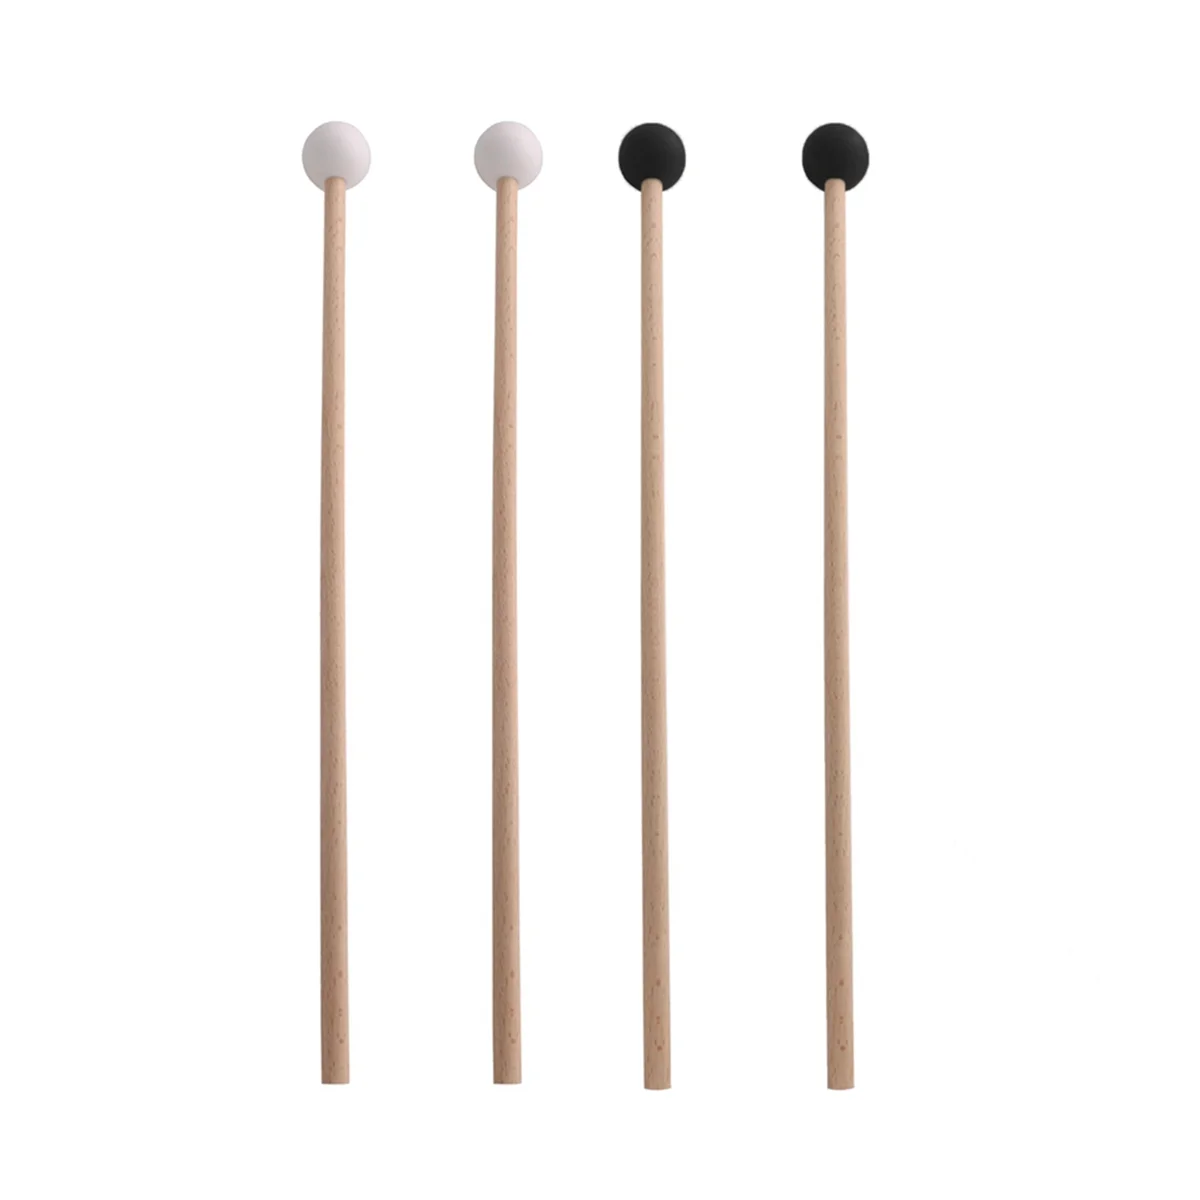 

2 Pairs Of Rubber Drumsticks Percussion Instrument Parts Xylophone/Marimba Mallets Hammer SCK-3 Rubber Head